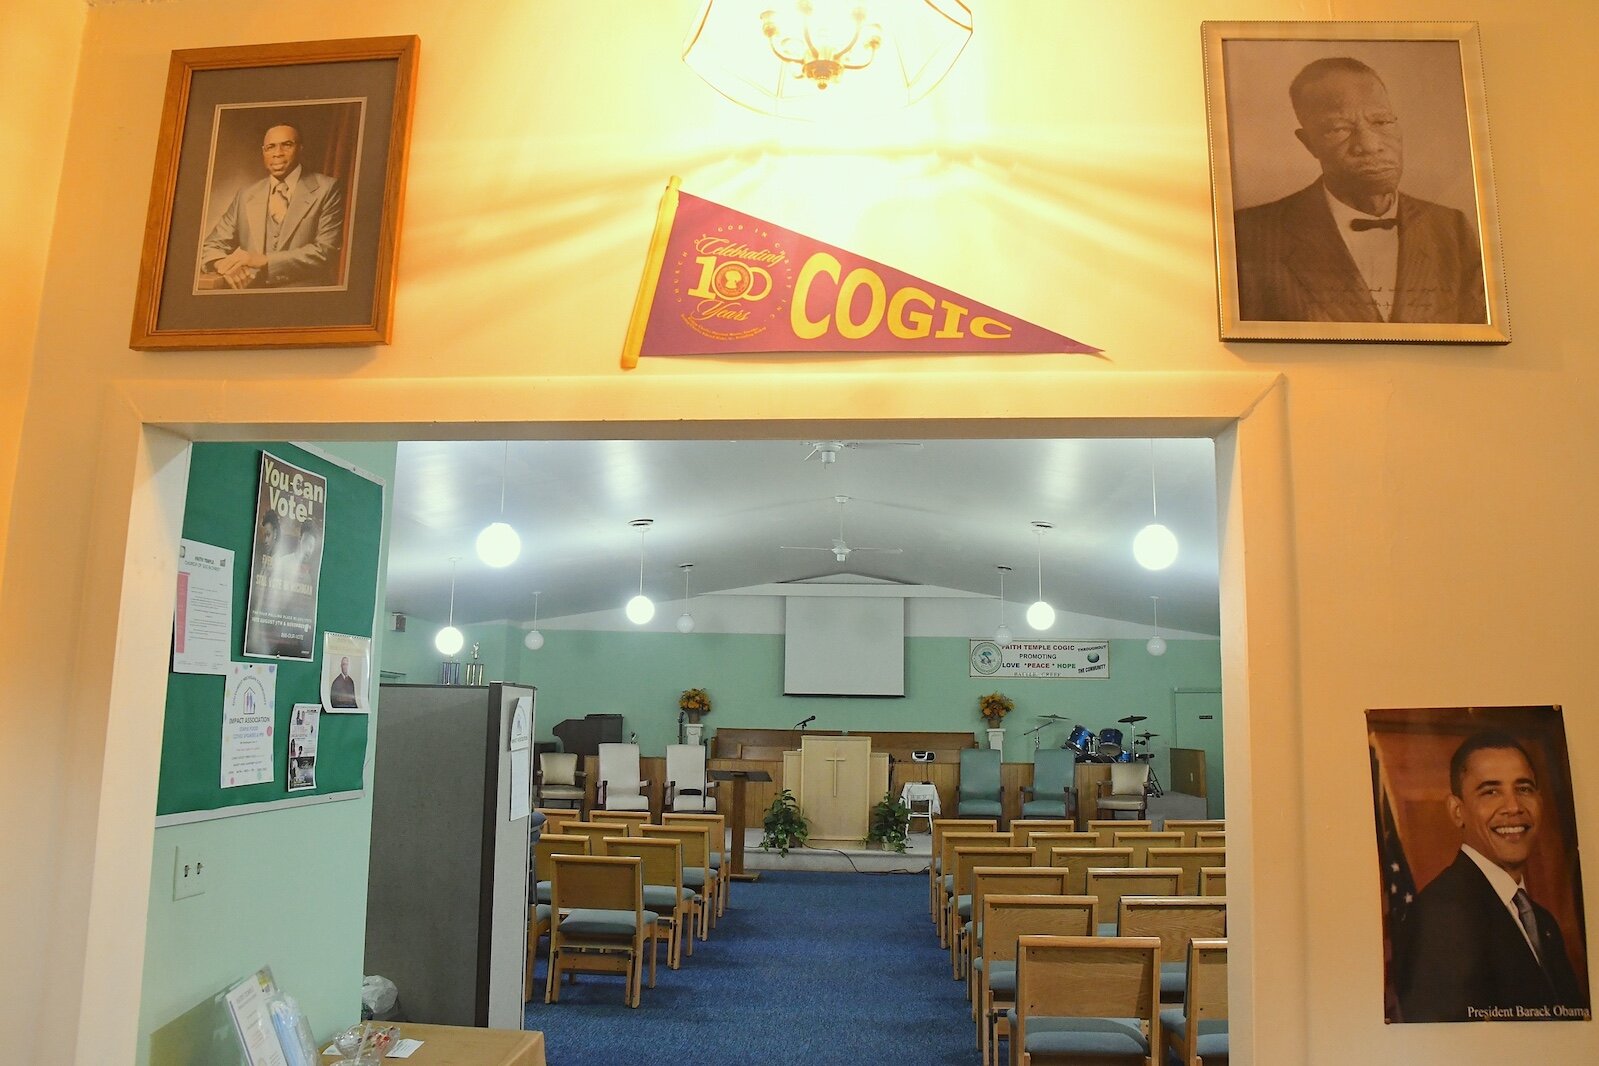 Upon entering Faith Temple Church of God in Christ one is greeted with pictures of, from left, Jessie W. Hooper, founder of the church, Charles Harris Mason, founder of the Church of God in Christ, and Barack Obama, below right.